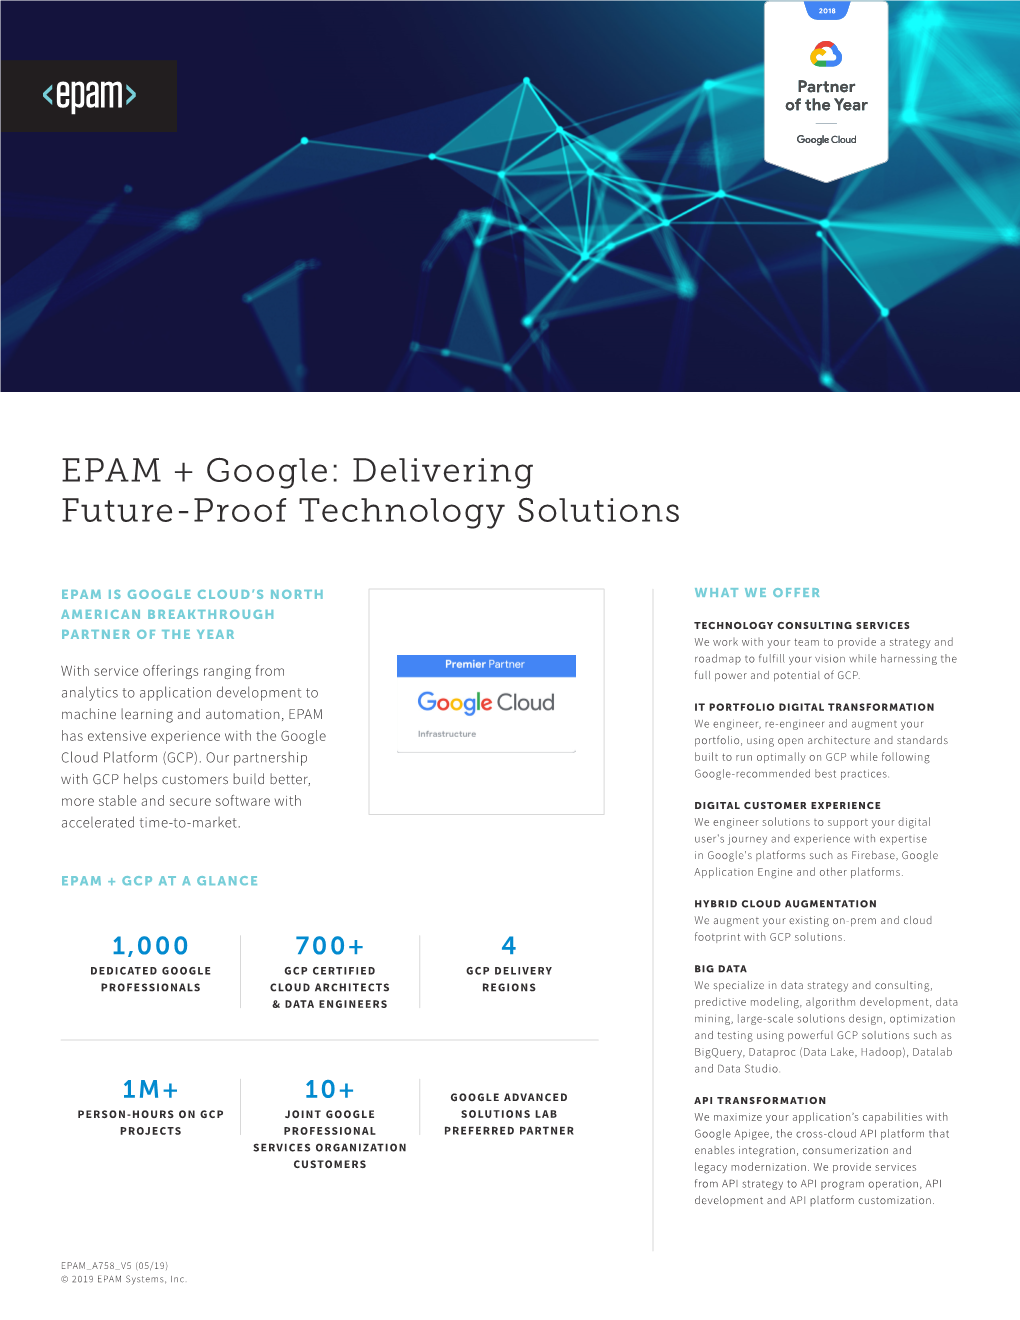 EPAM + Google: Delivering Future-Proof Technology Solutions